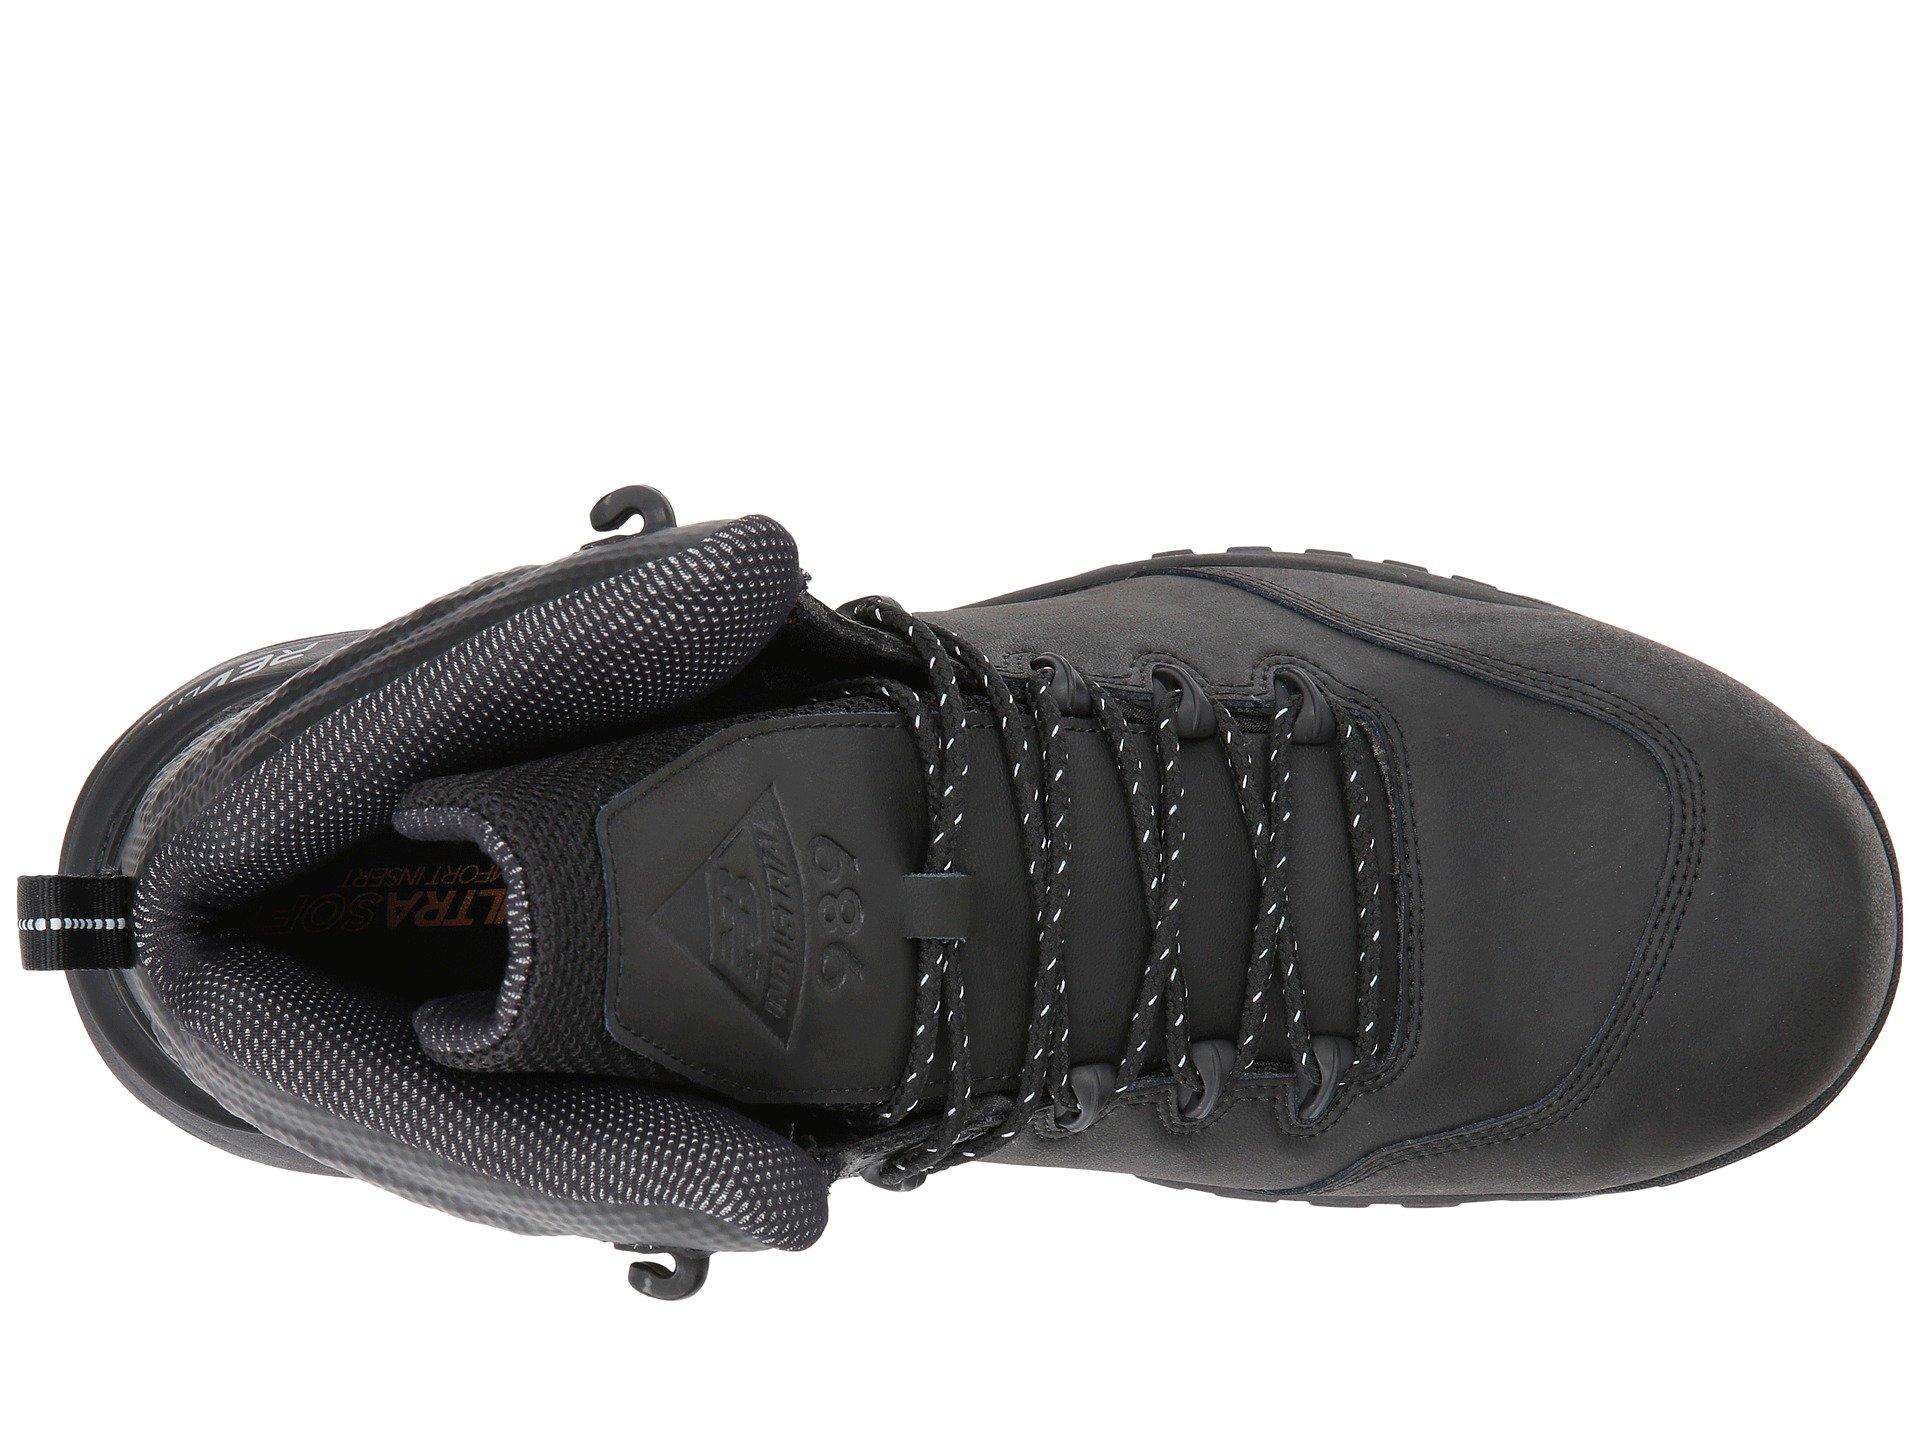 New Balance Leather Mid989v1 in Black 